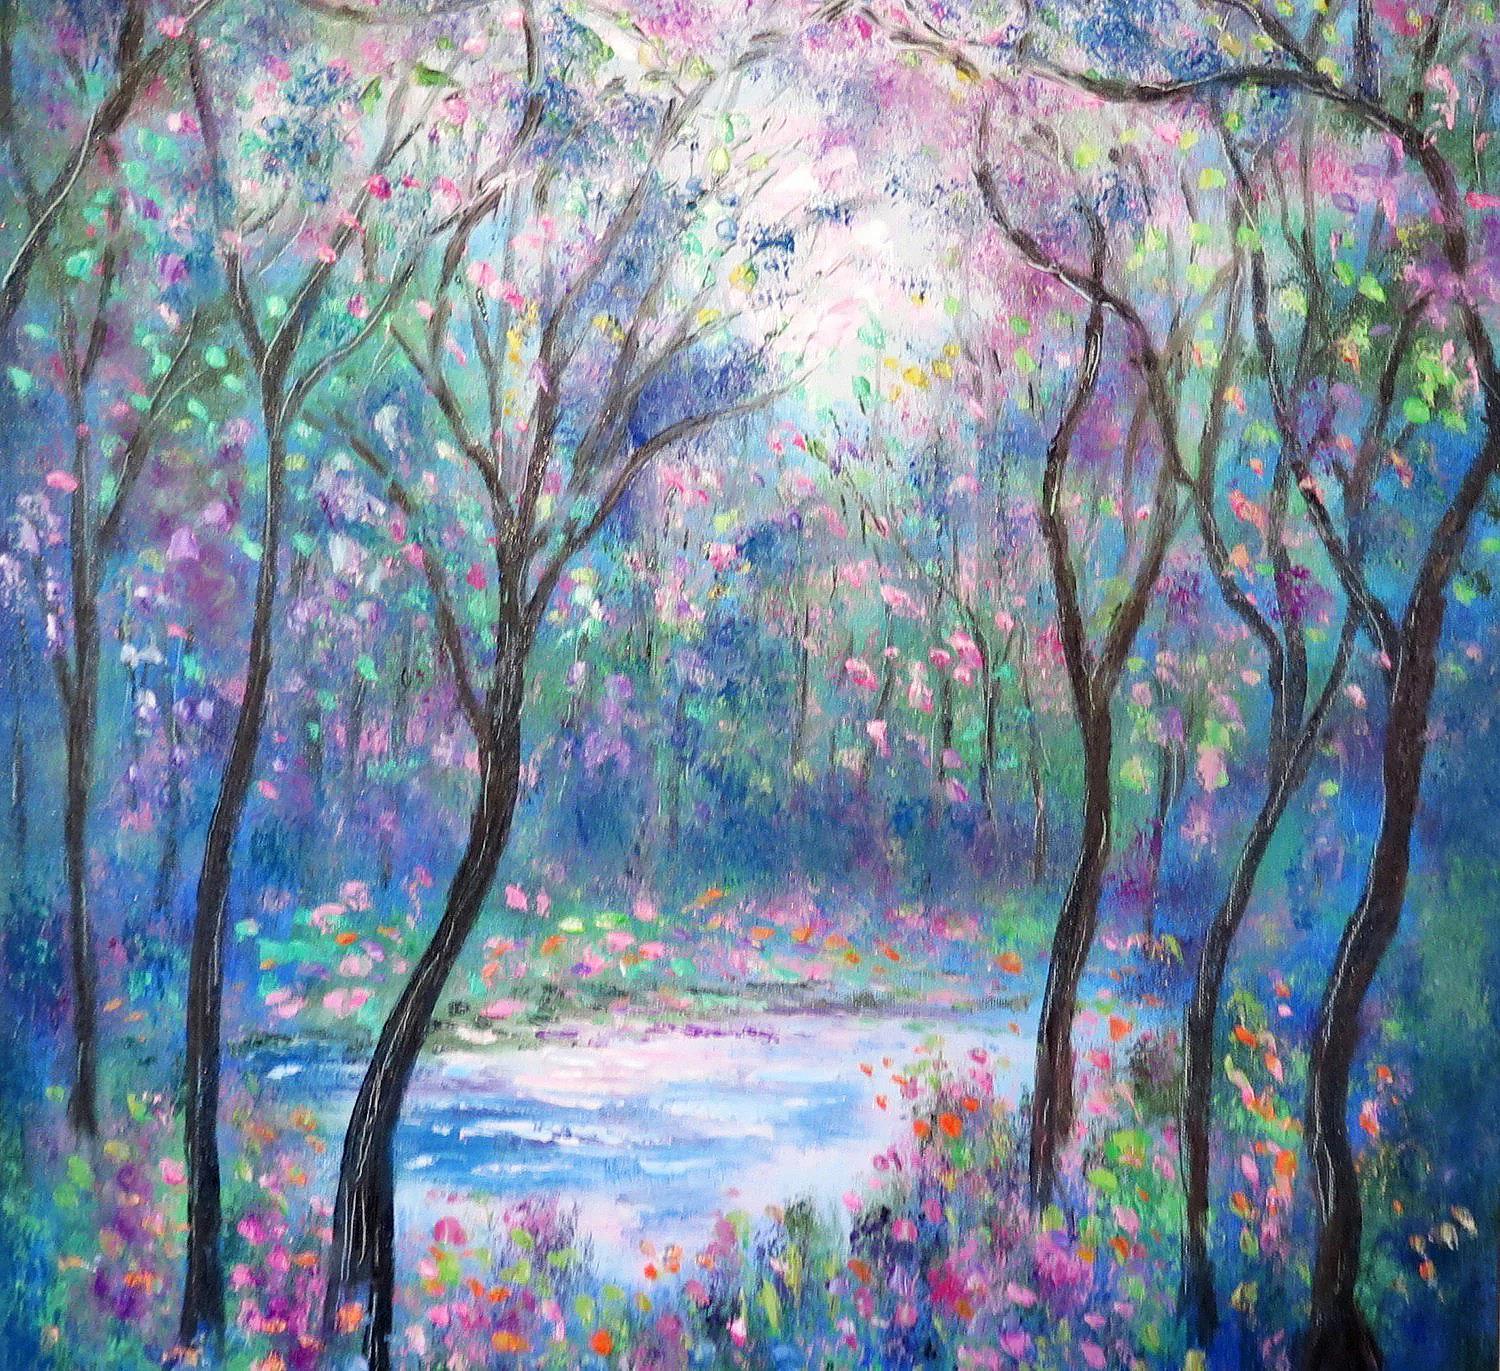 Sweet Spring Pond blossom trees garden decor scenery wall art nature landscape Oil Paintings